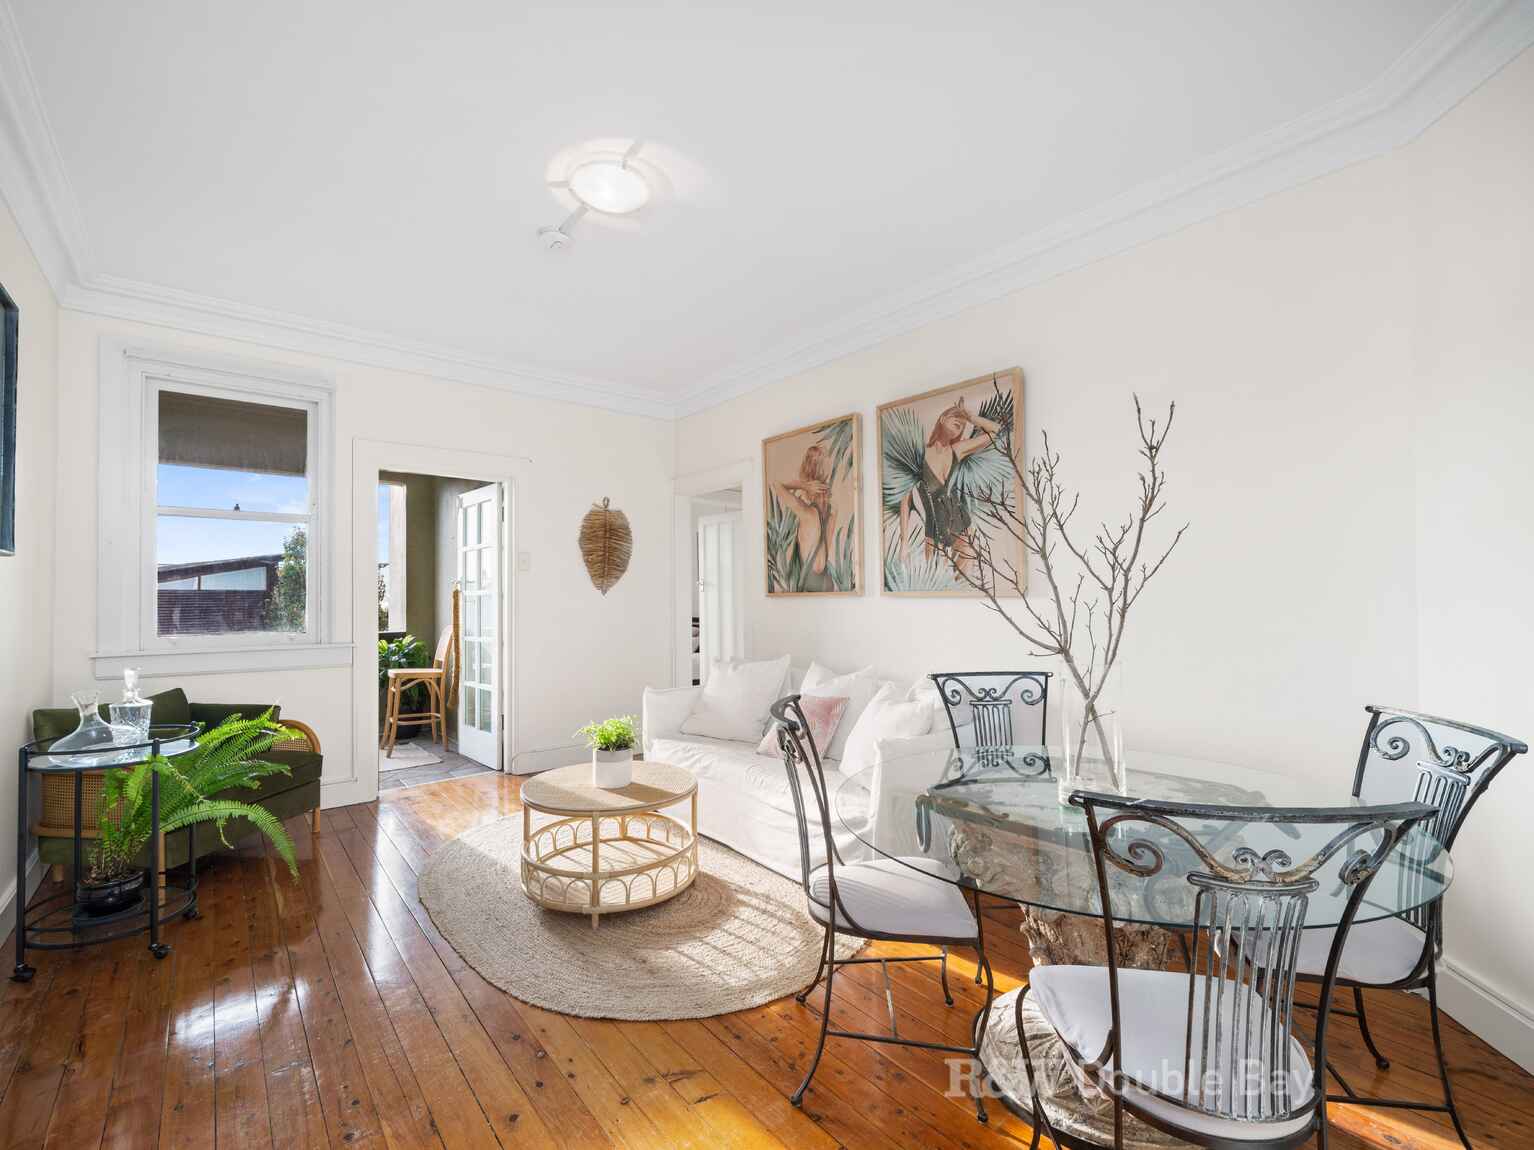 4/668-670 New South Head Road Rose Bay